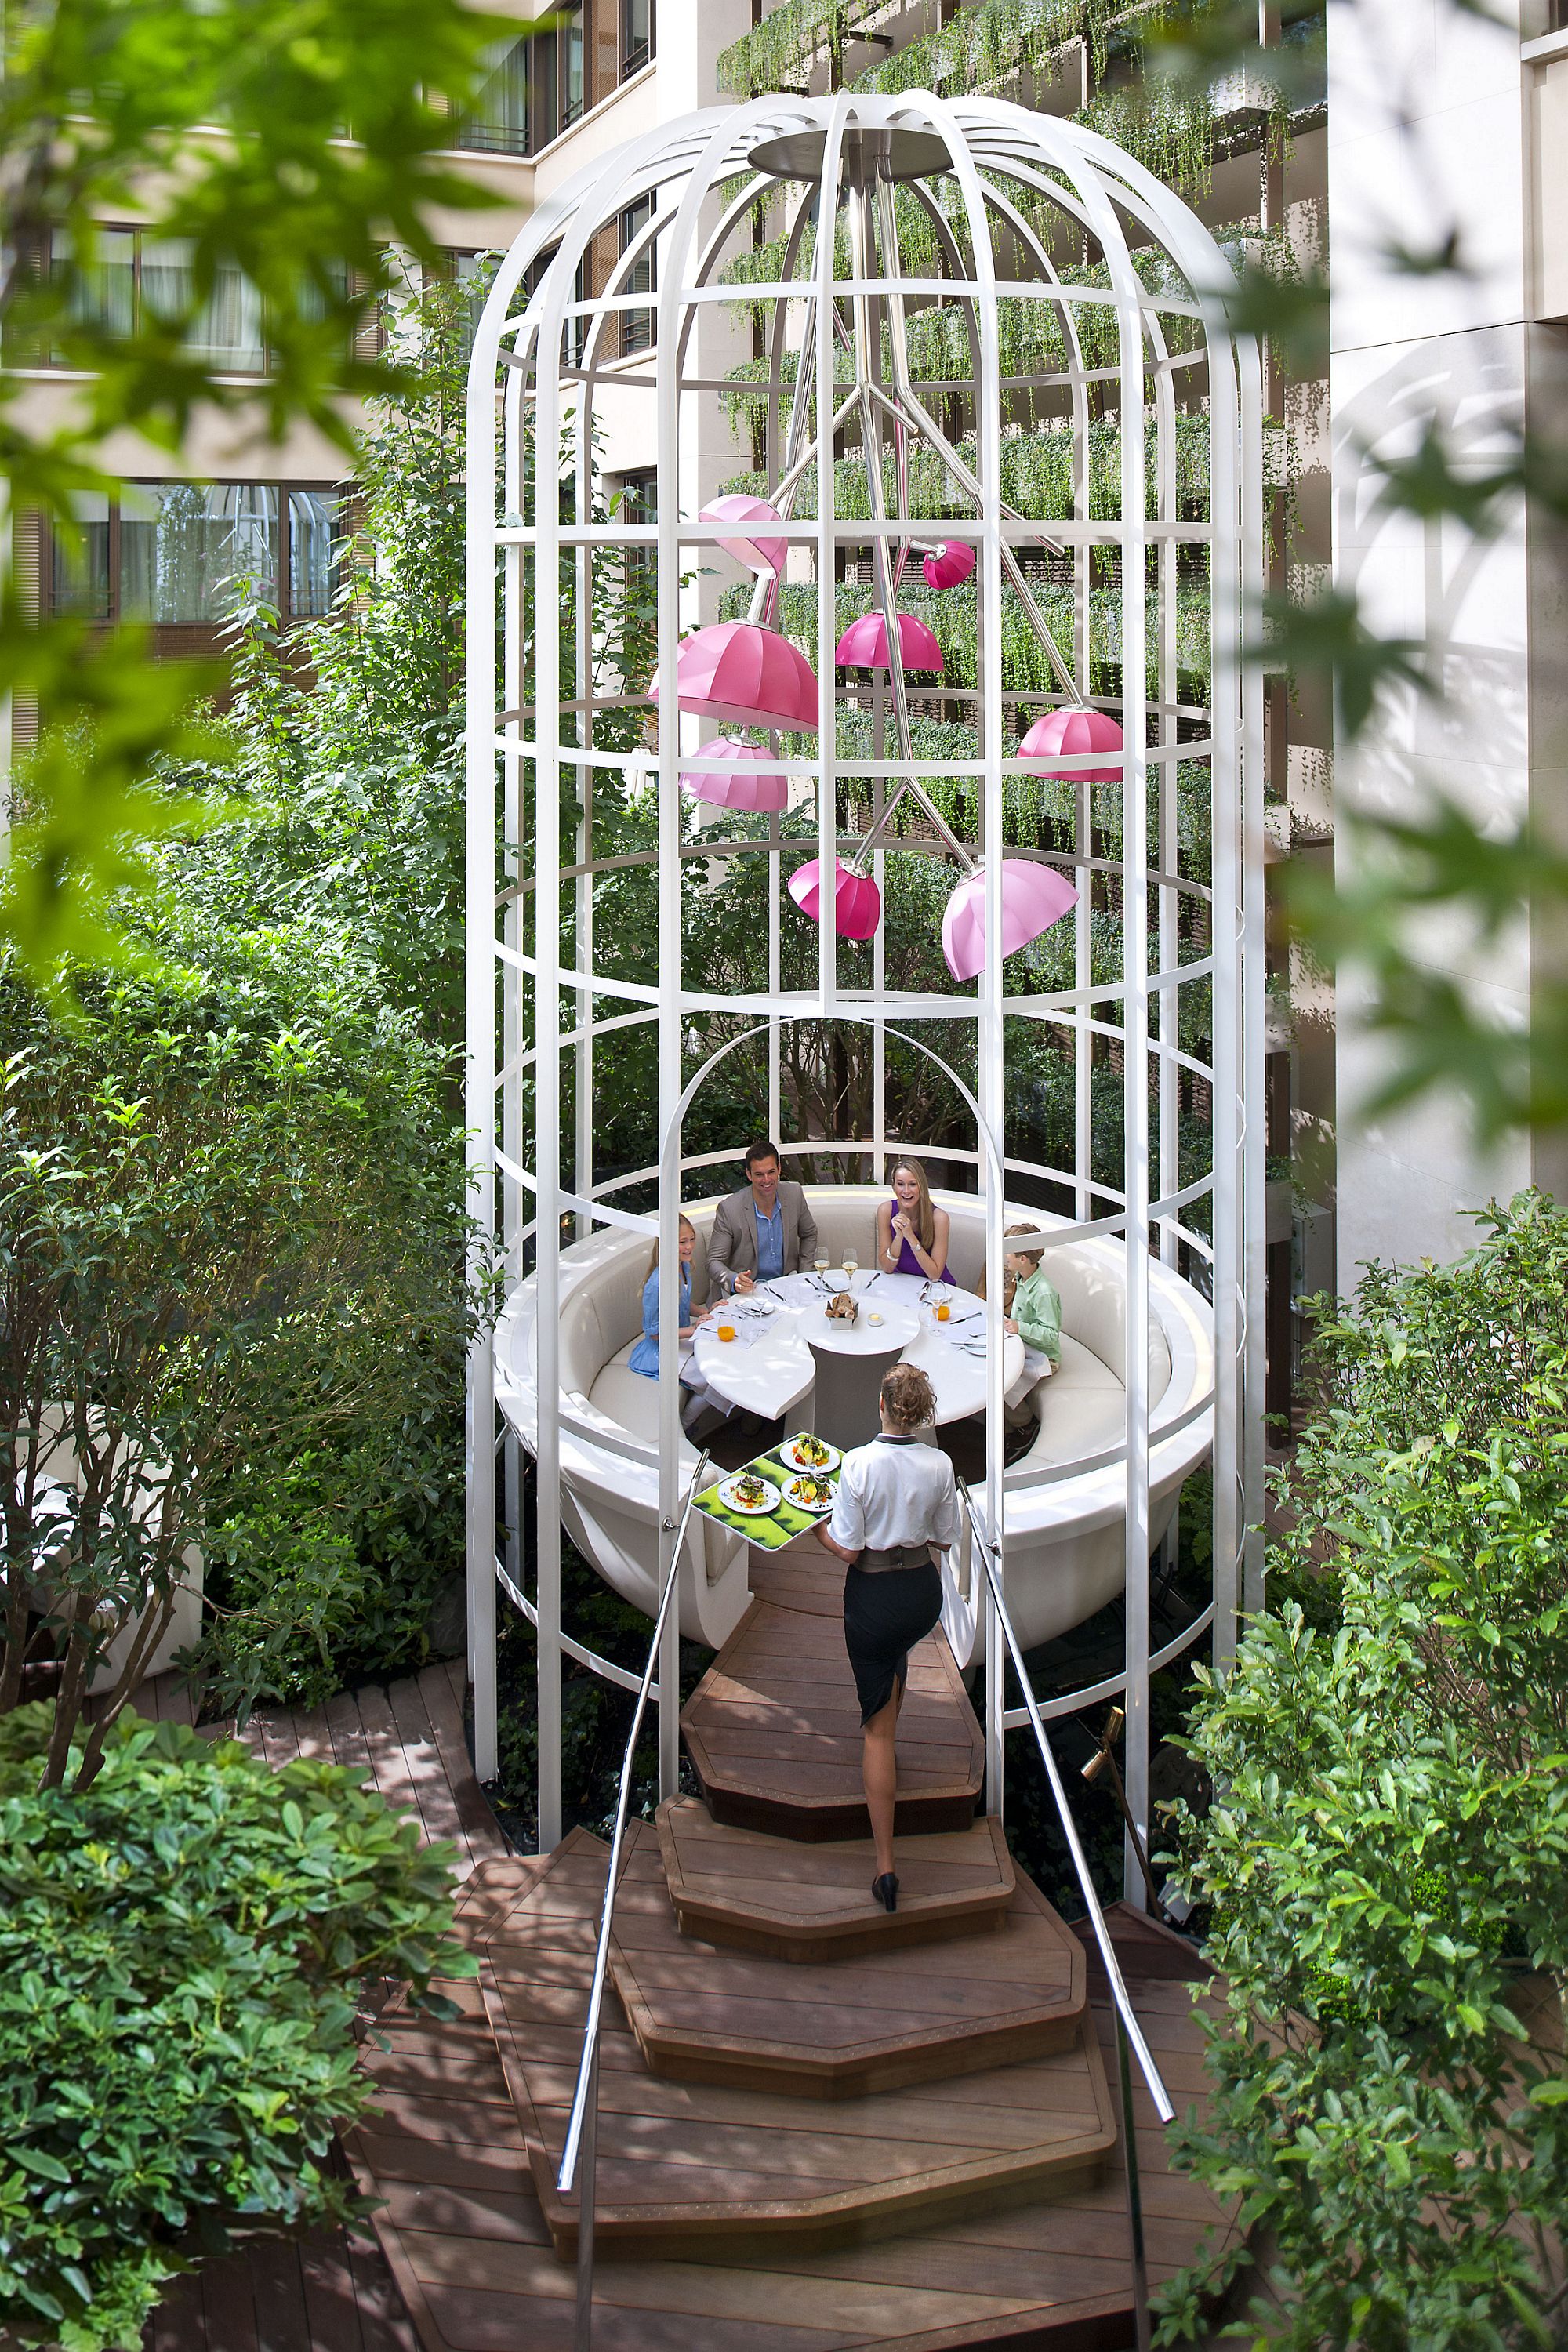 Dine in style and surrounded by nature at the Mandarin Oriental, Paris